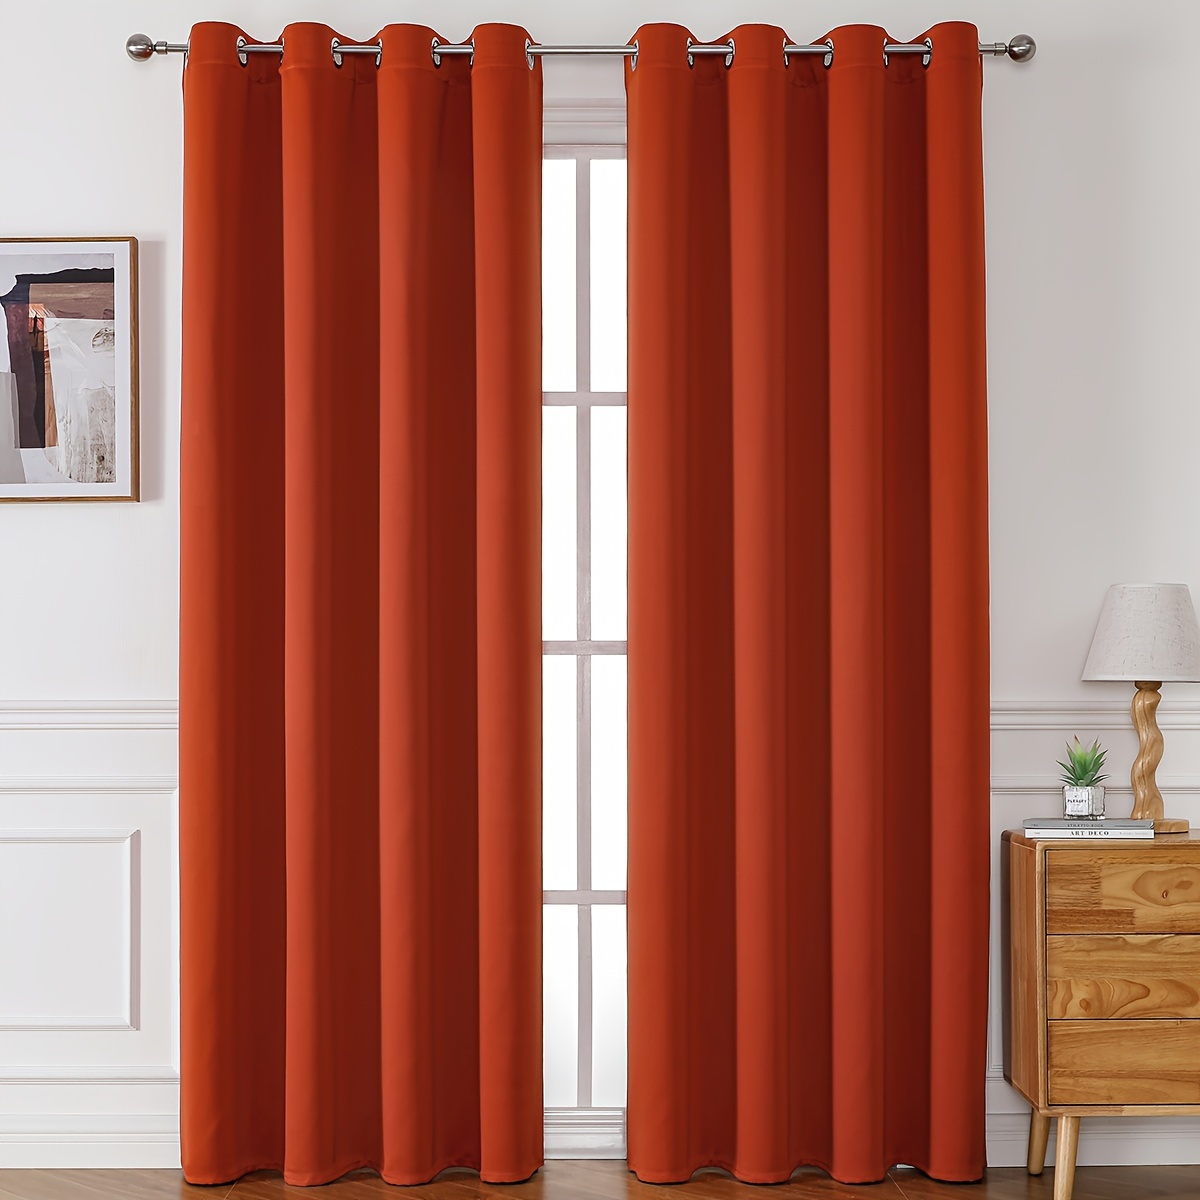 

1pc Blackout Curtain Panel Solid Eyelet Curtains For Bedrooms And Living Rooms Thermal Insulated Curtains Decorative Curtains Home Decor